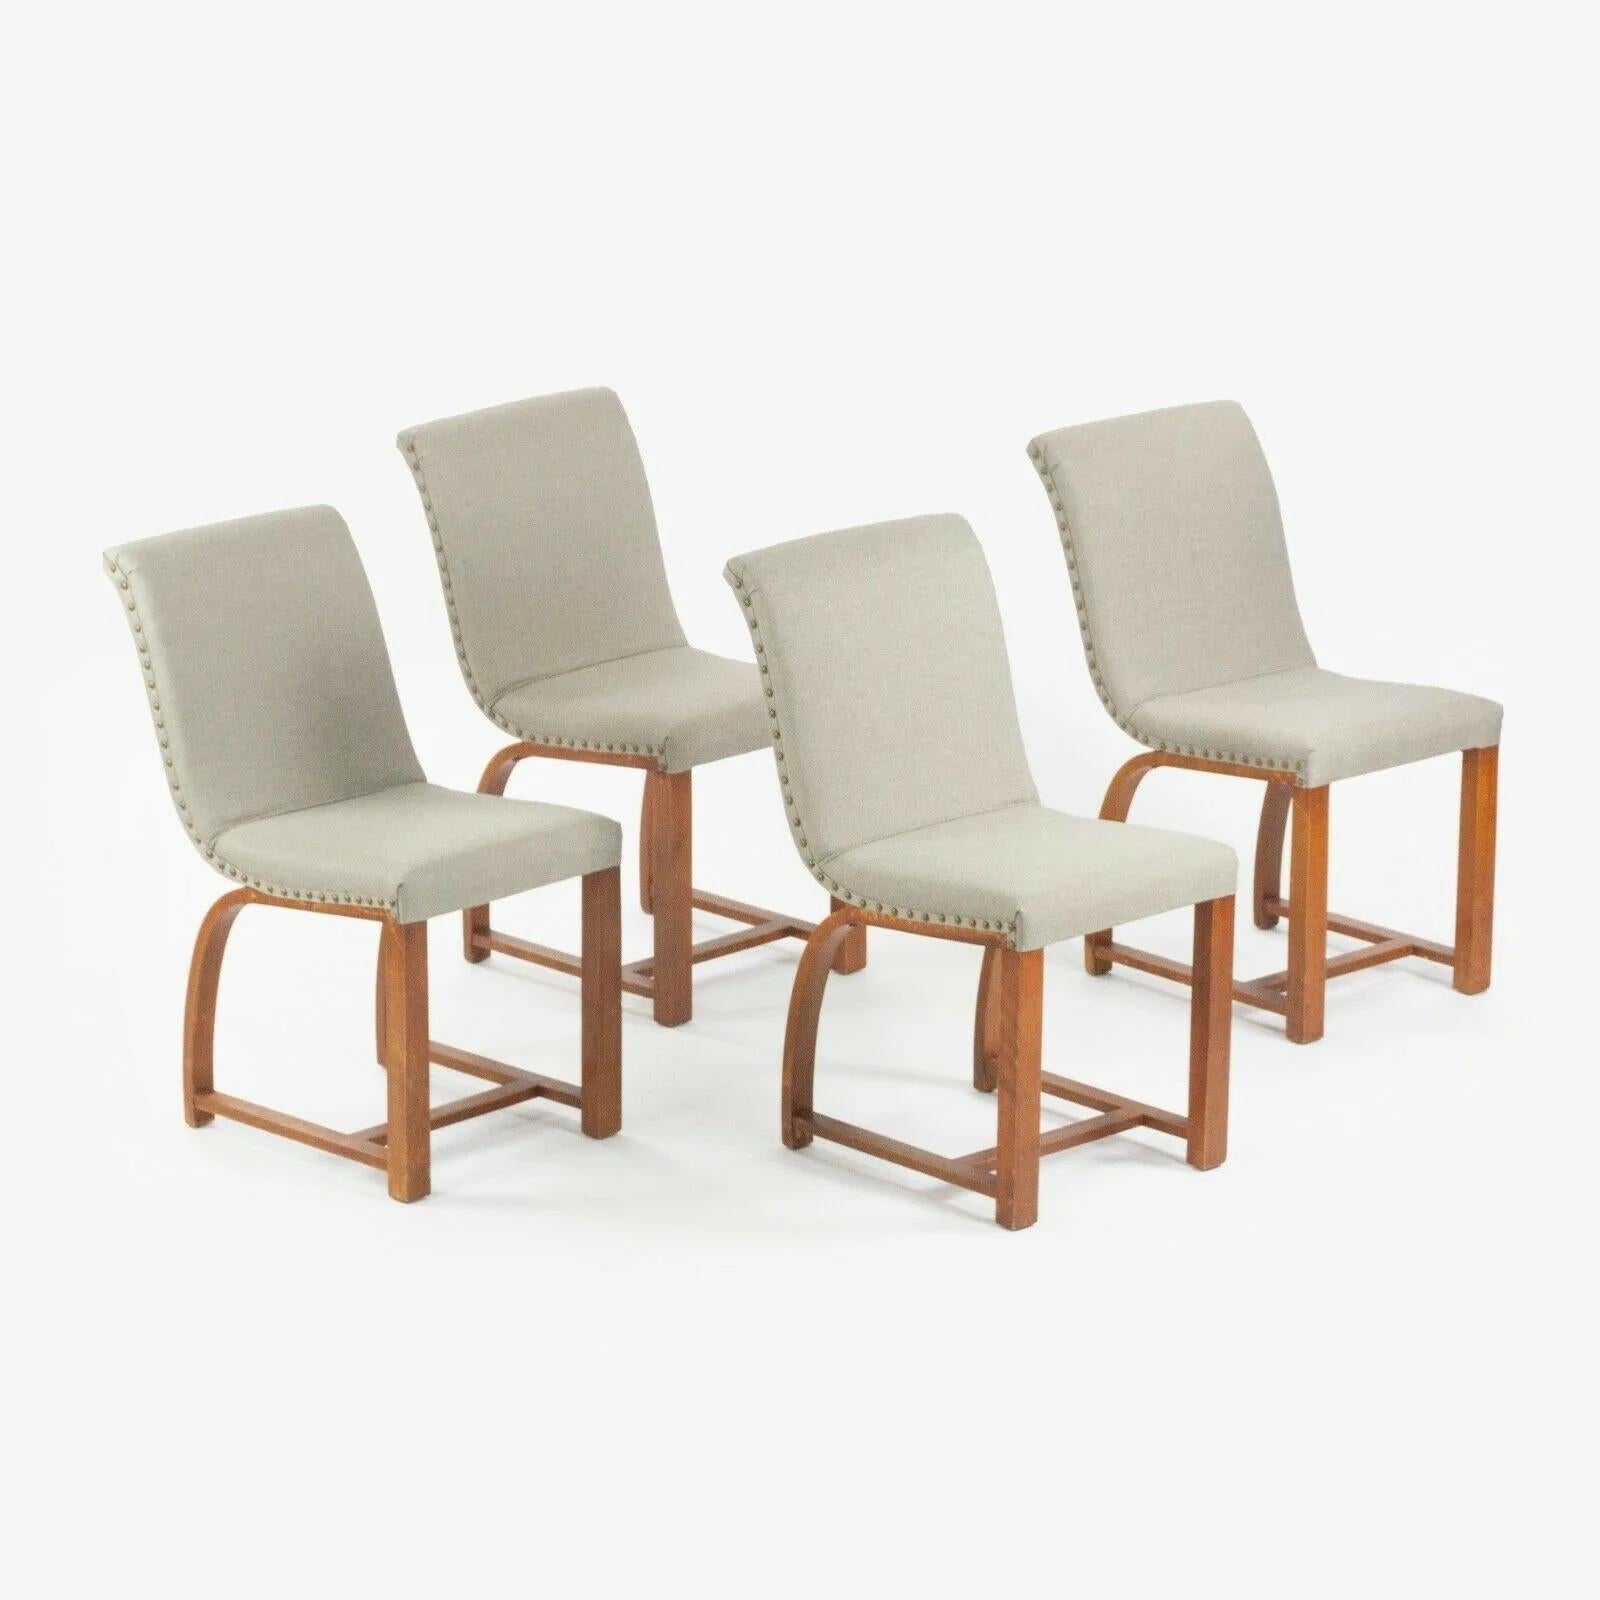 1930s Set of 4 Gilbert Rohde Dining Chairs for Heywood Wakefield in Knoll Fabric For Sale